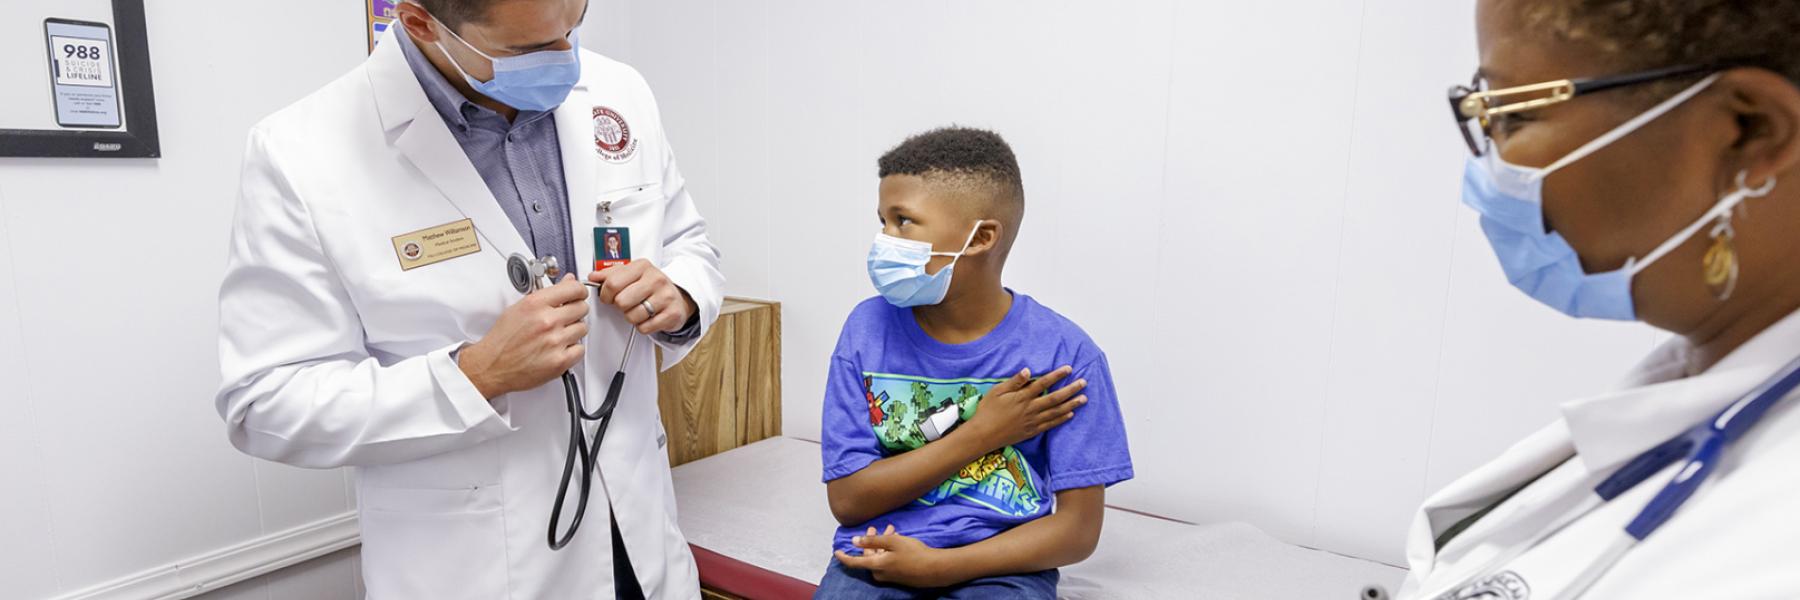 Pediatricians offer a first line of defense for detecting the mental health risk of children.